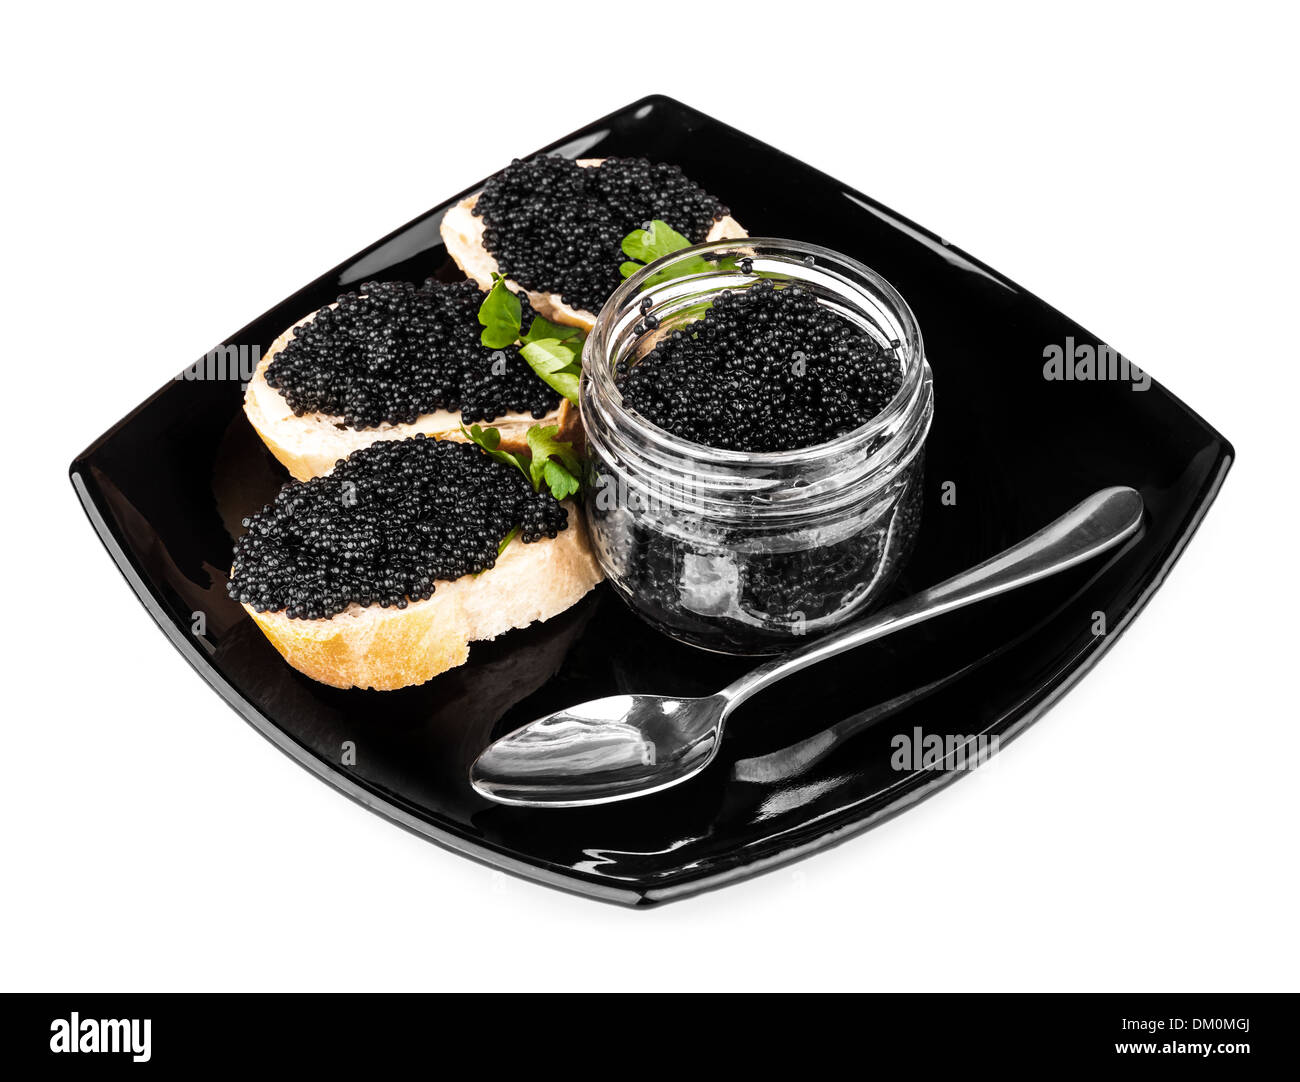 Sandwiches with black caviar and spoon on dark plate Stock Photo